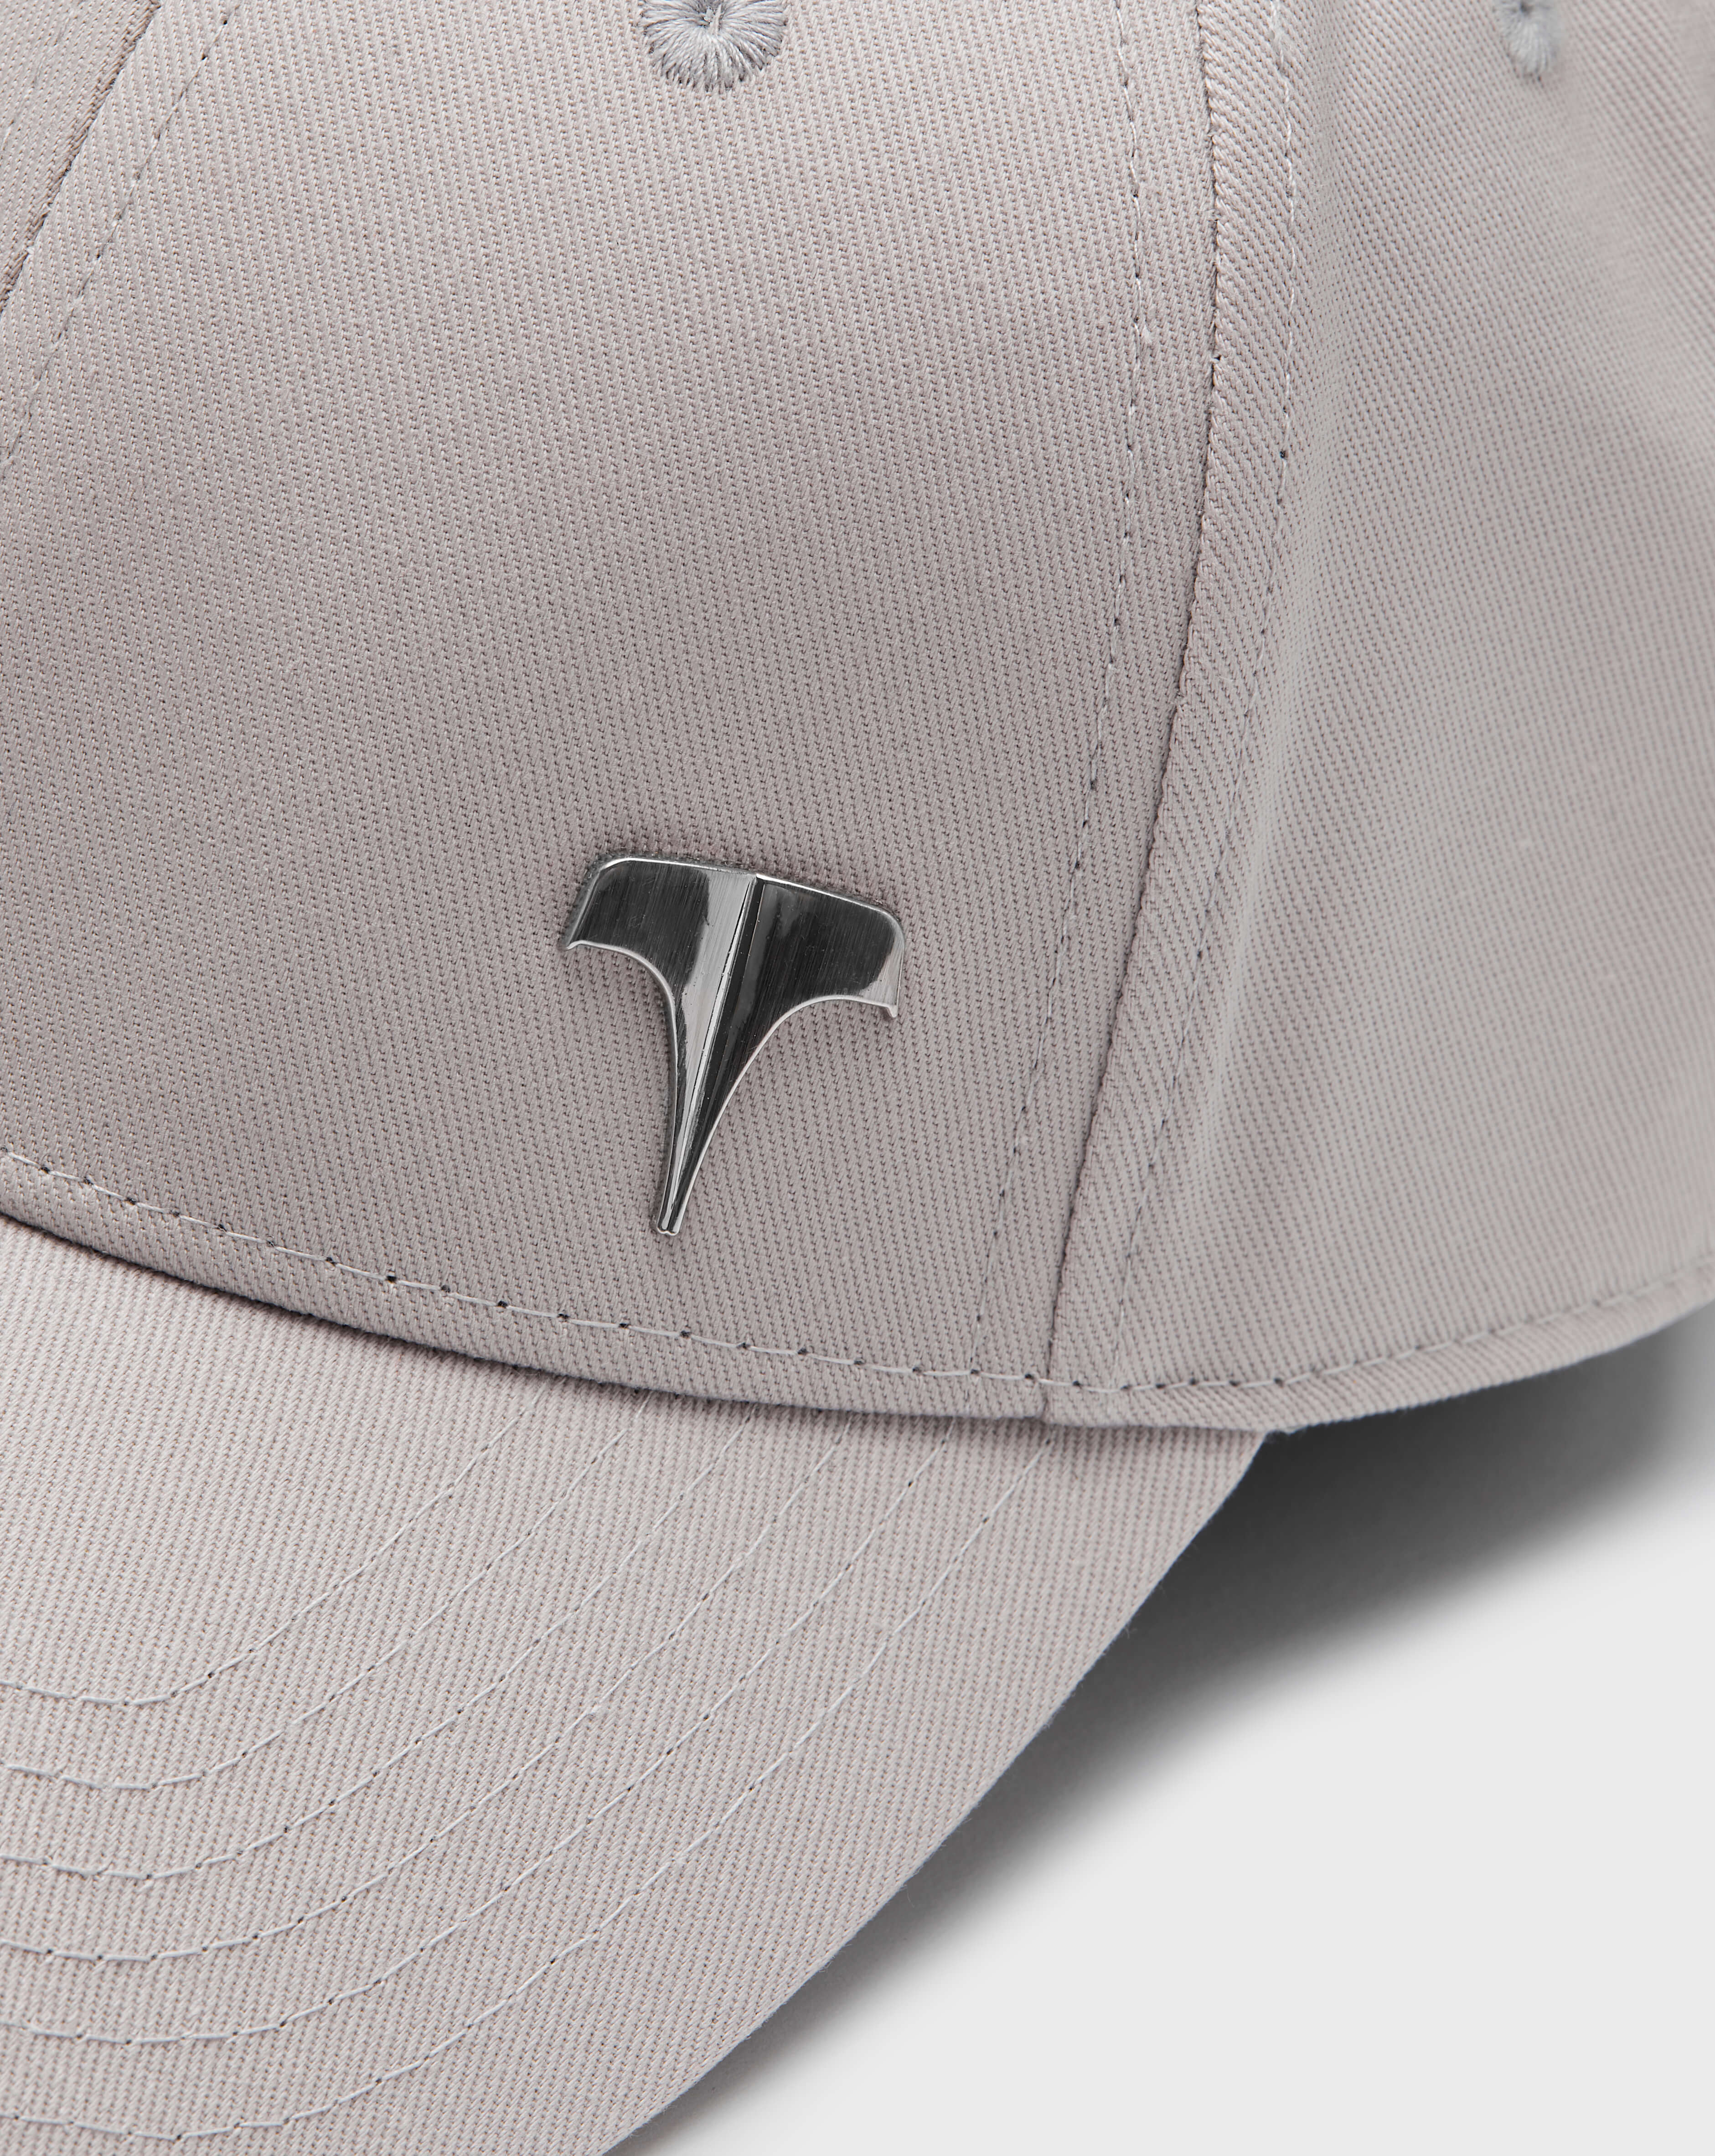 Twinzz silver grey pitcher cap with silver logo